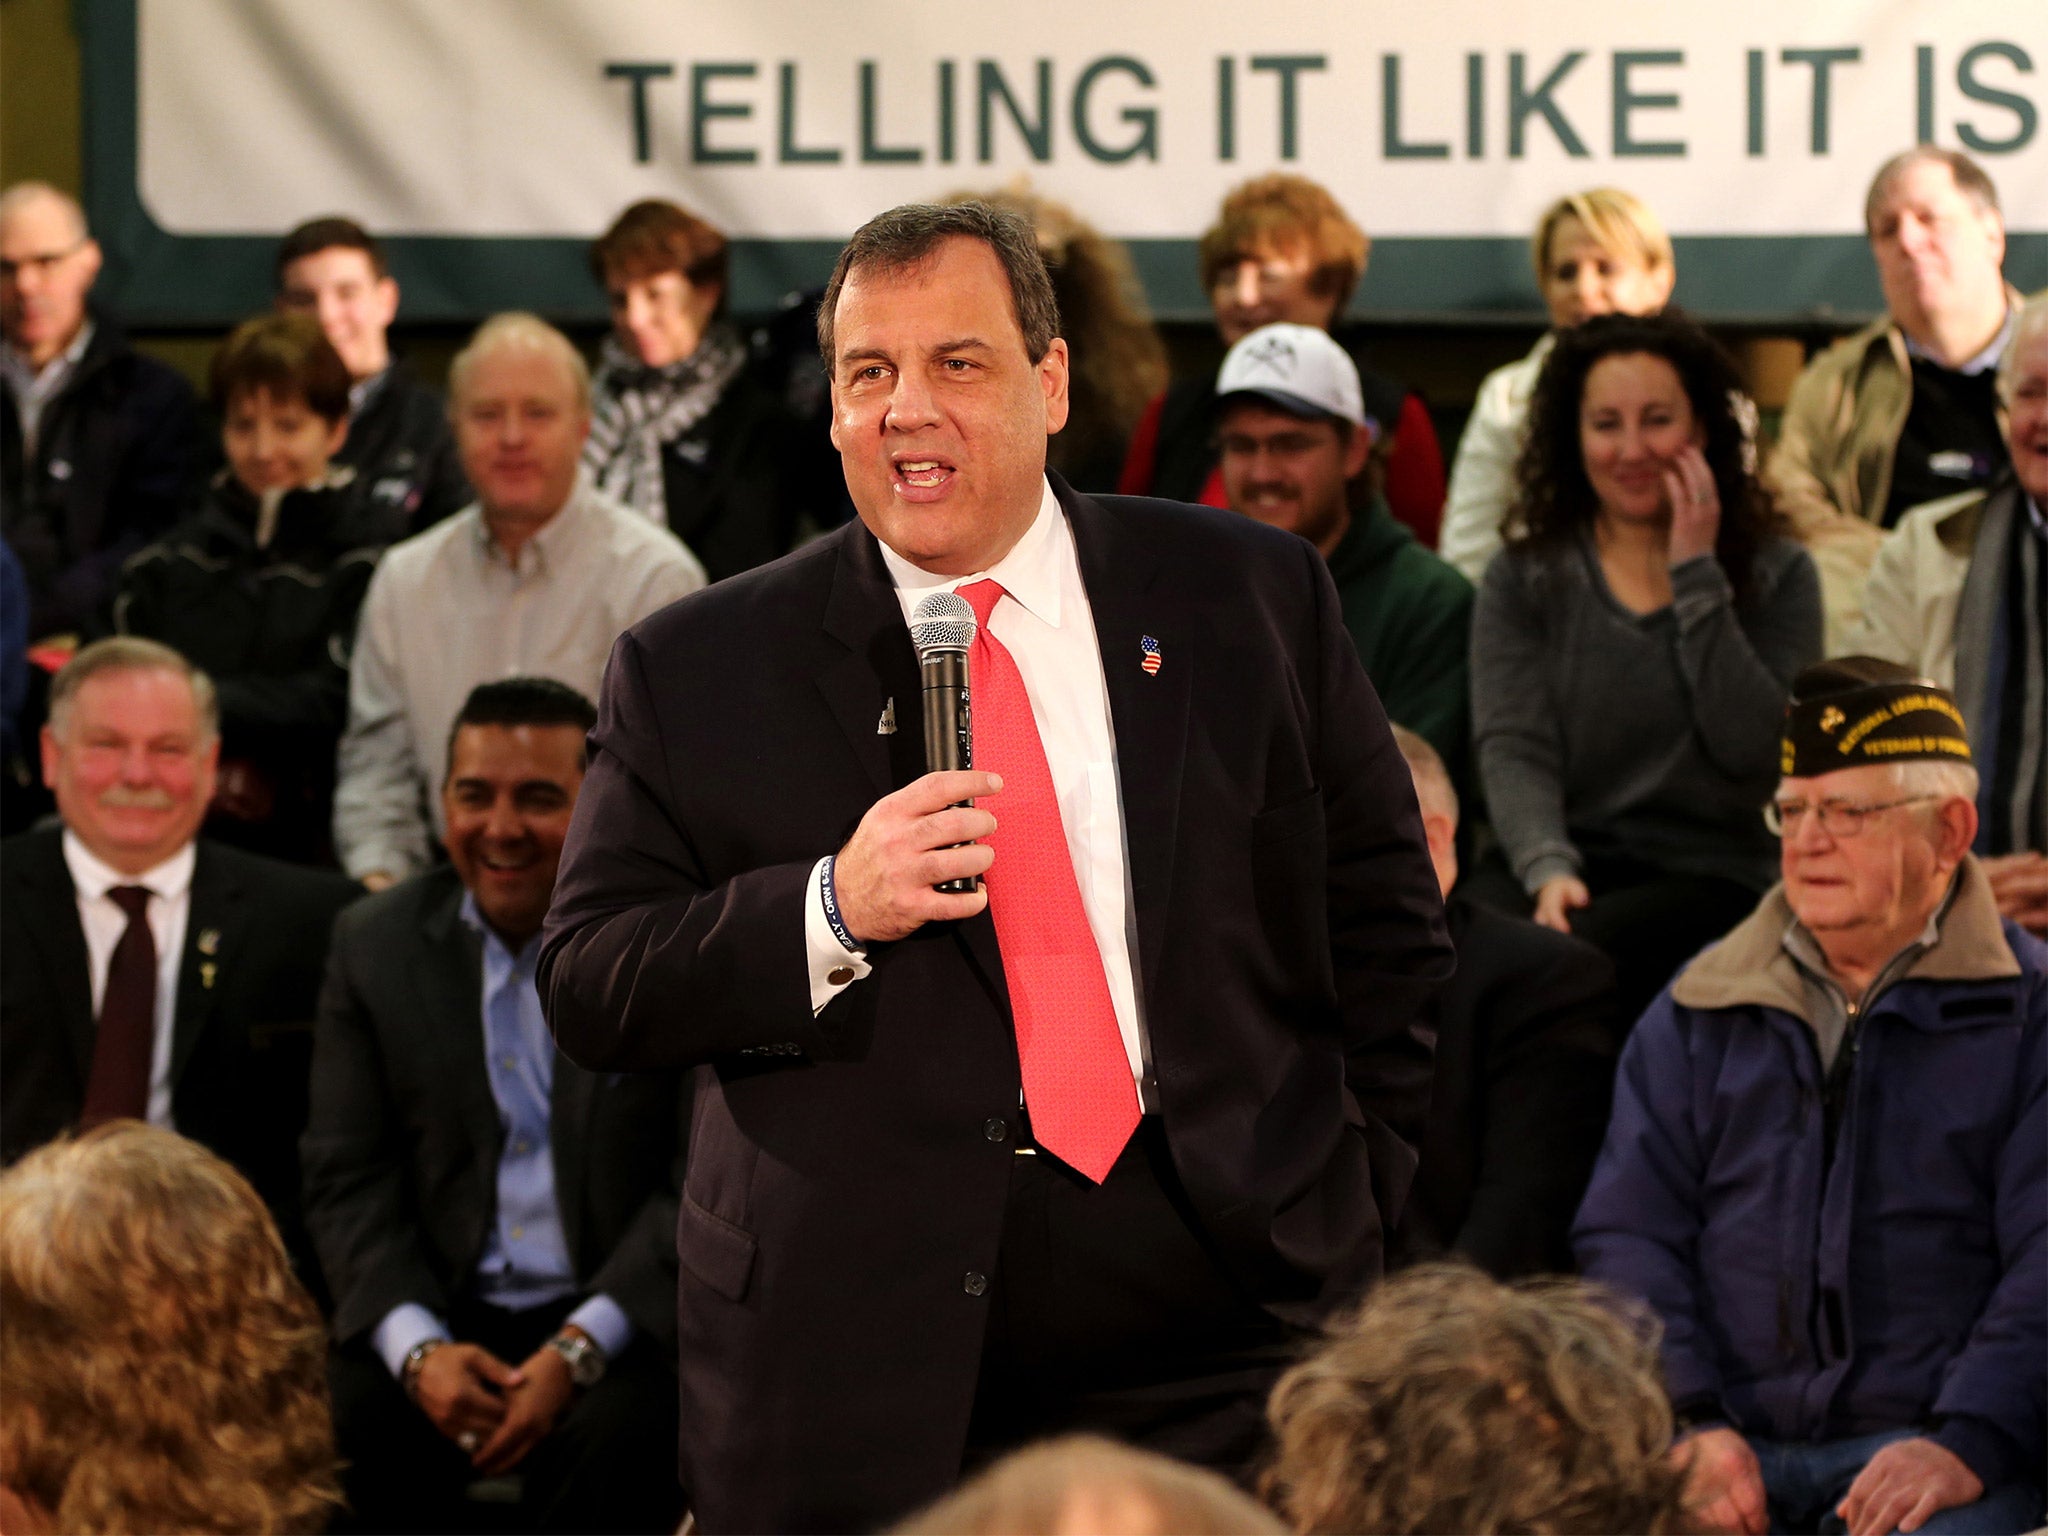 Governor Chris Christie vetoed a bill banning child marriage because it did not 'comport with the sensibilities and, in some cases, the religious customs' of the people of New Jersey